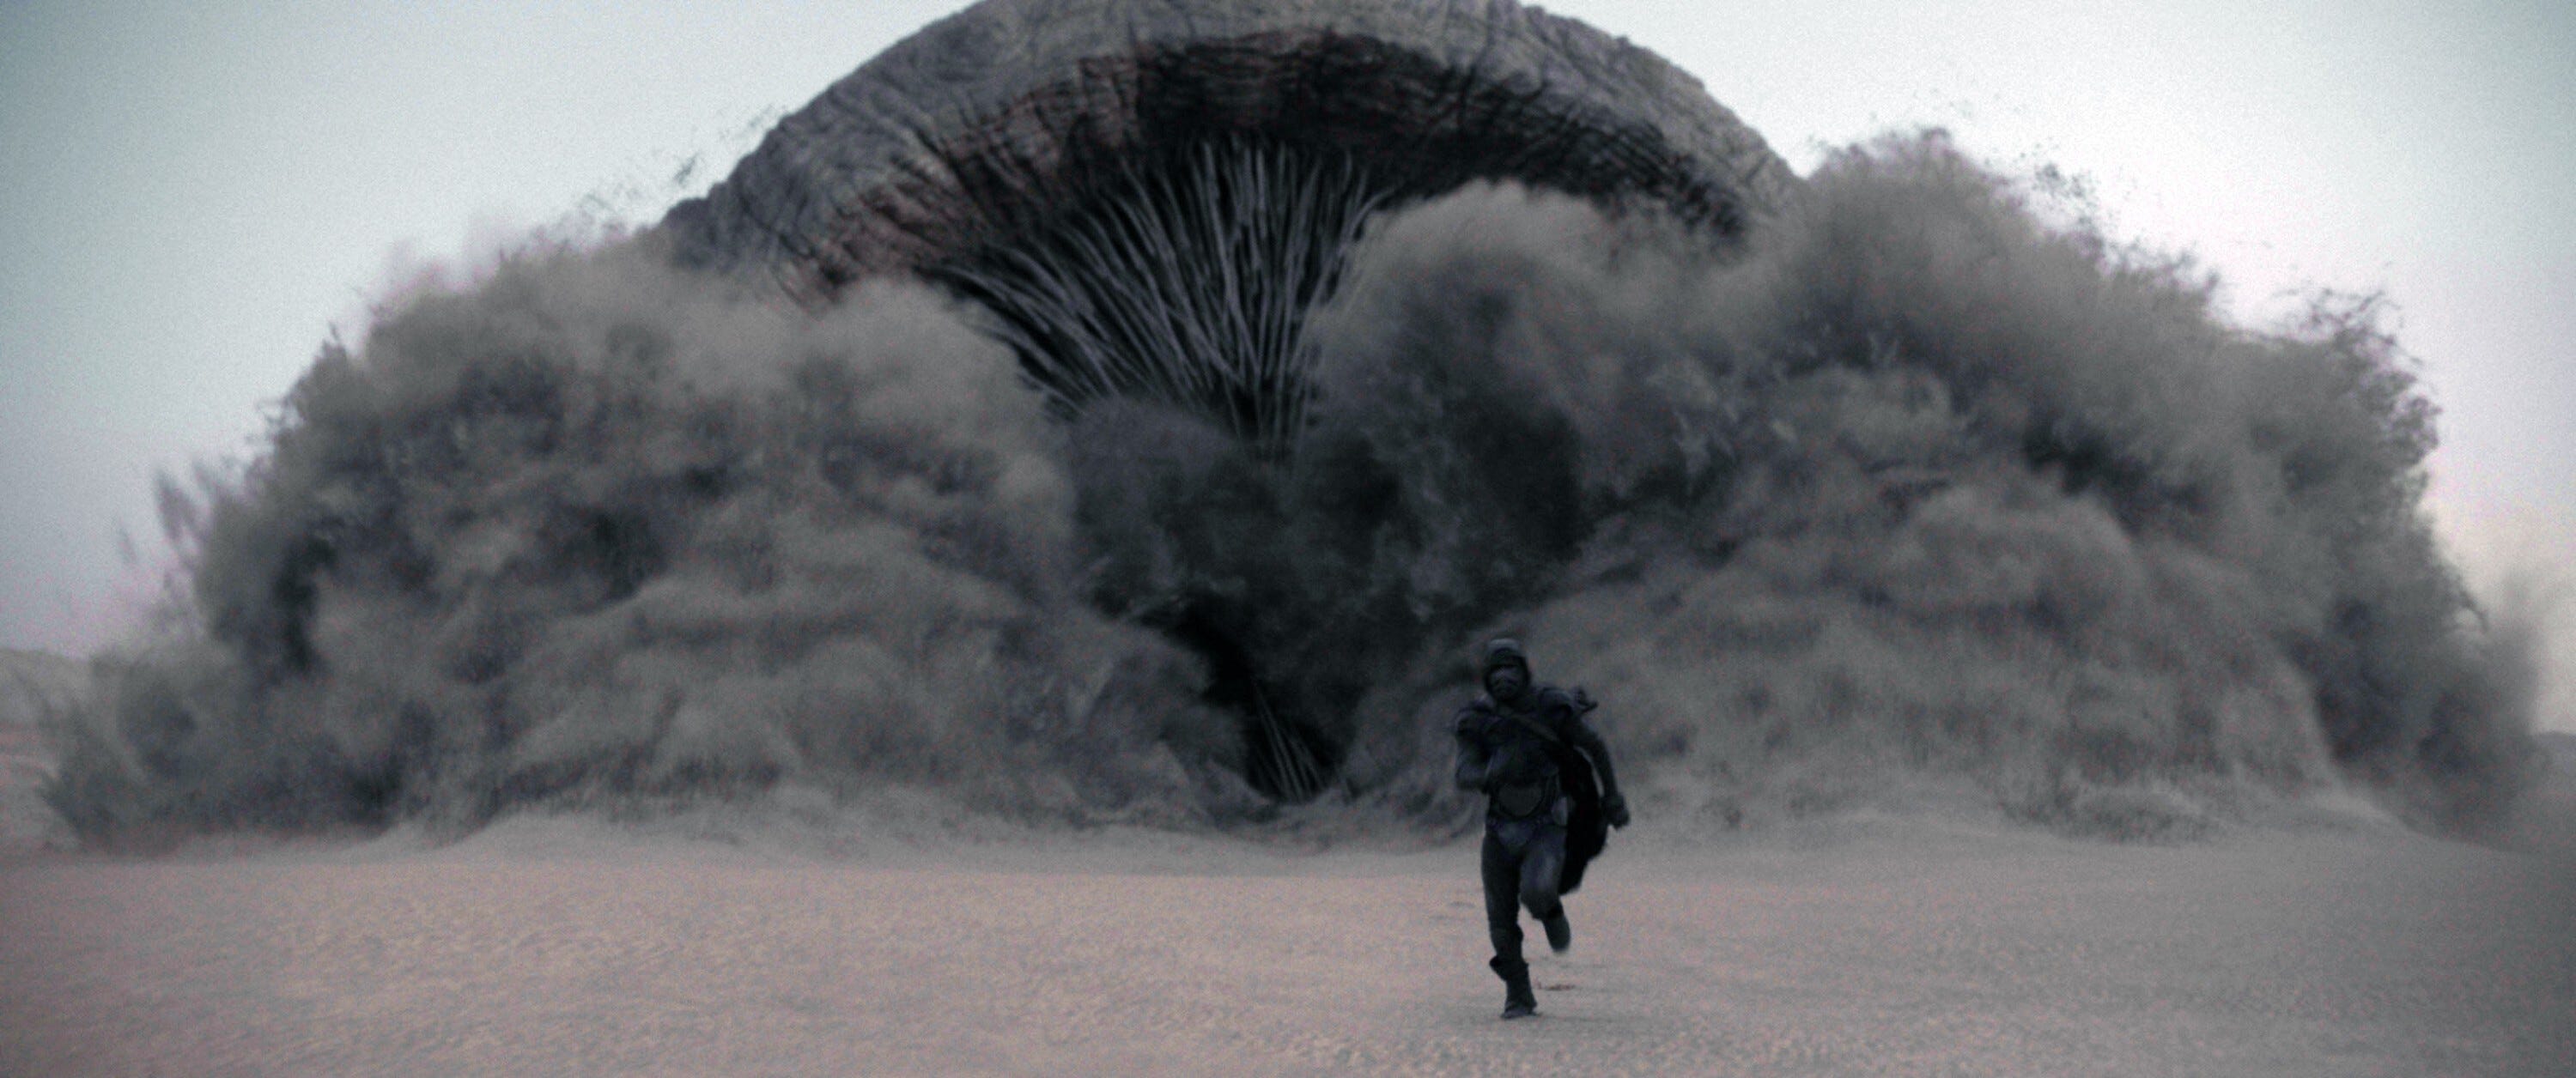 Here's How 'Dune' Pulled Off Those Wild Sandworm Sound Effects